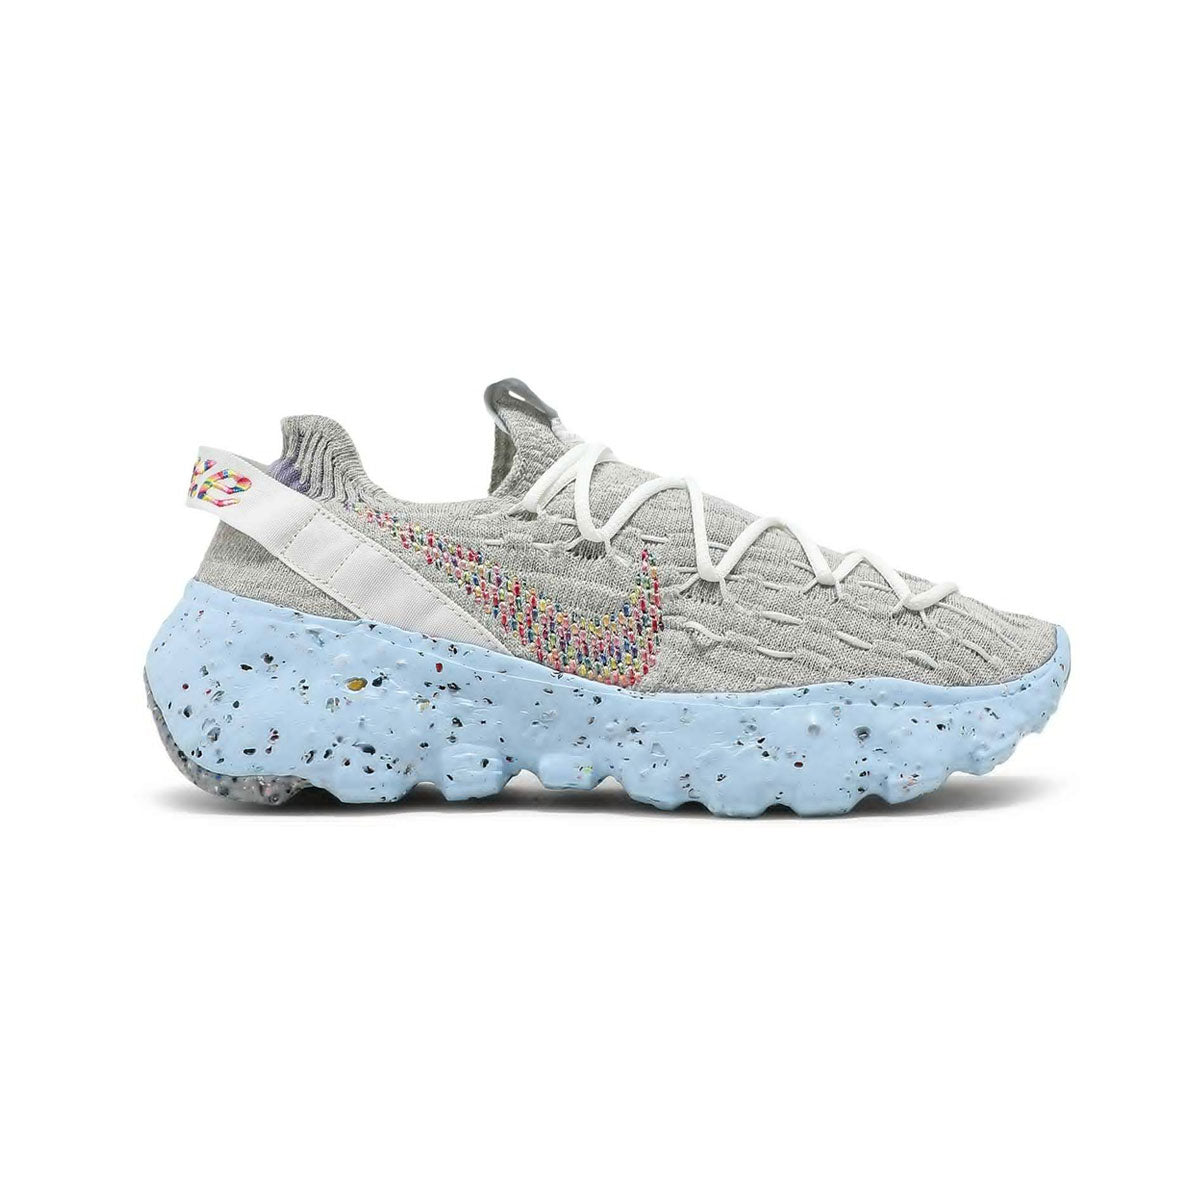 Nike Women's Space Hippie 04 Summit White Multi NWOB (NEW WITH DEFECT)